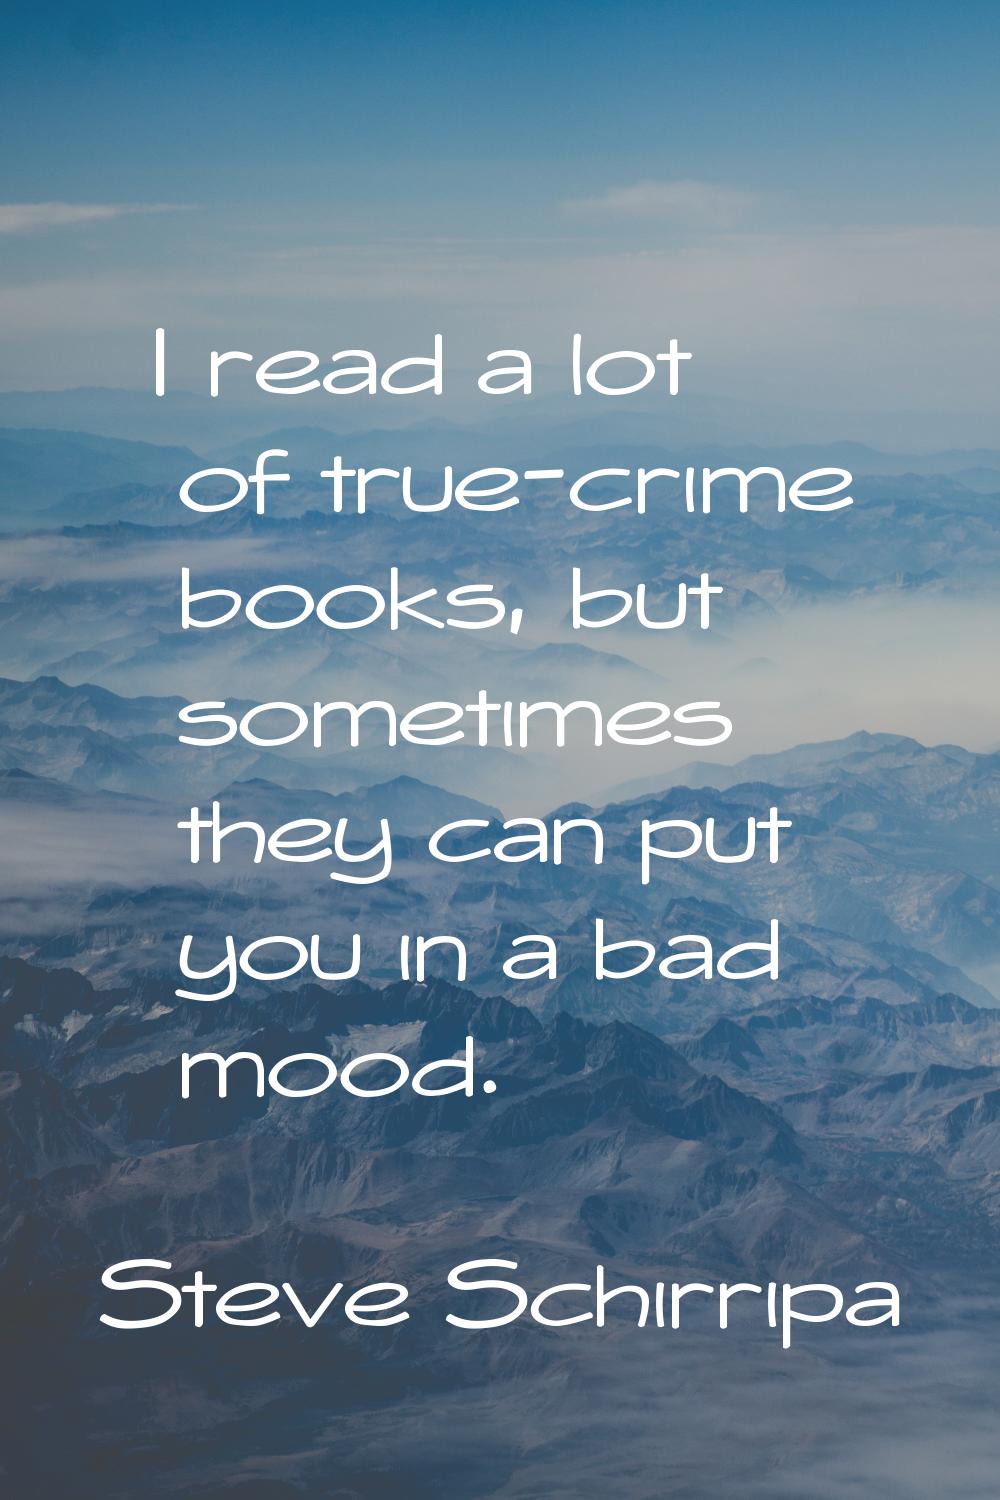 I read a lot of true-crime books, but sometimes they can put you in a bad mood.